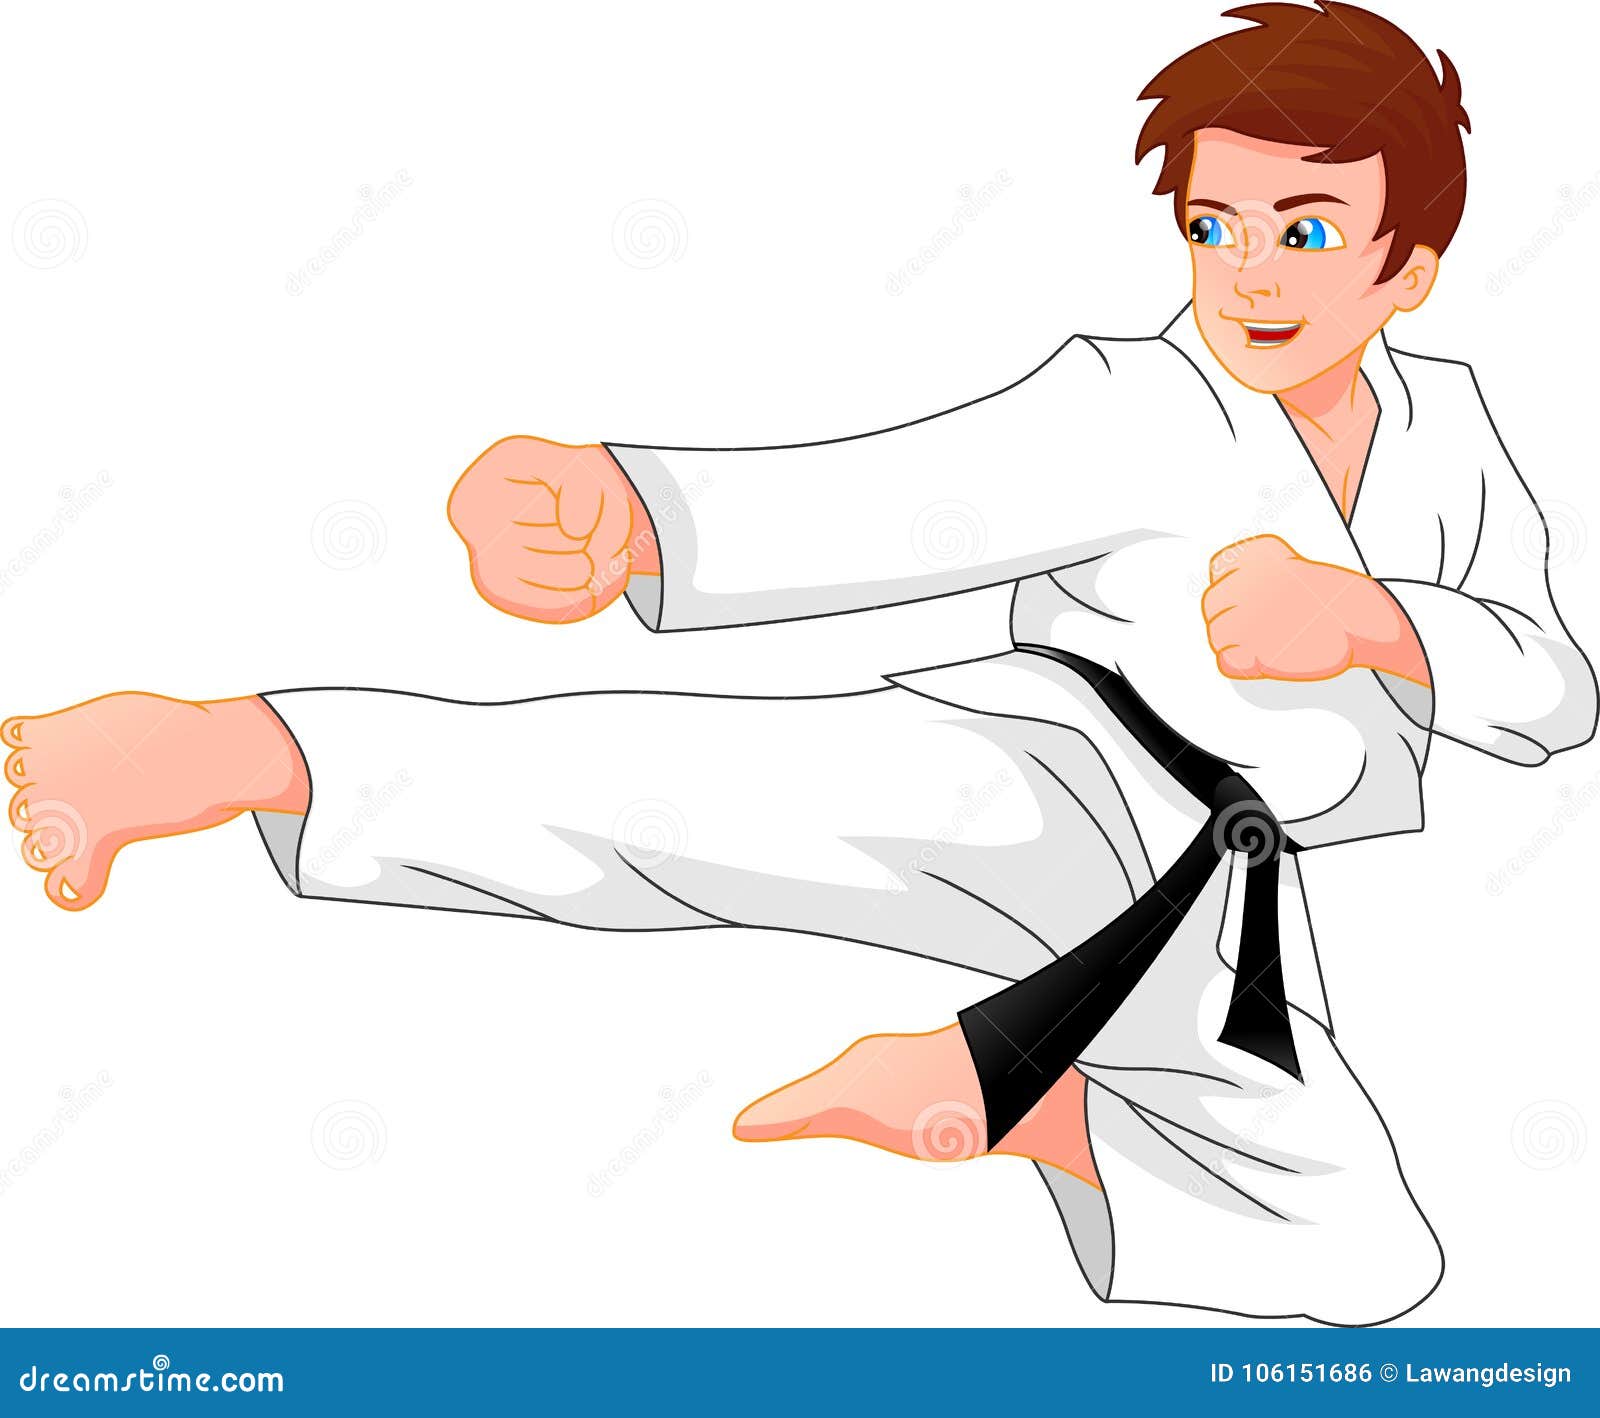 Cute karate boy stock vector. Illustration of painting - 106151686